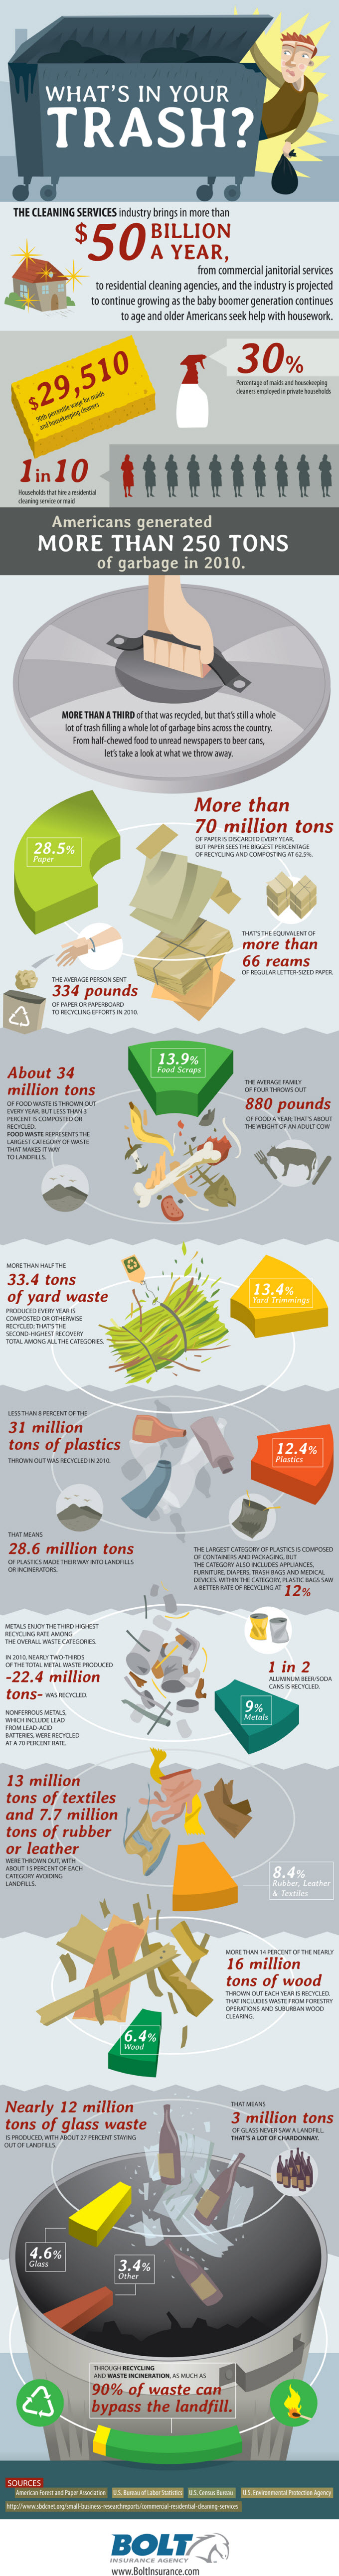 What's in Your Trash Infographic